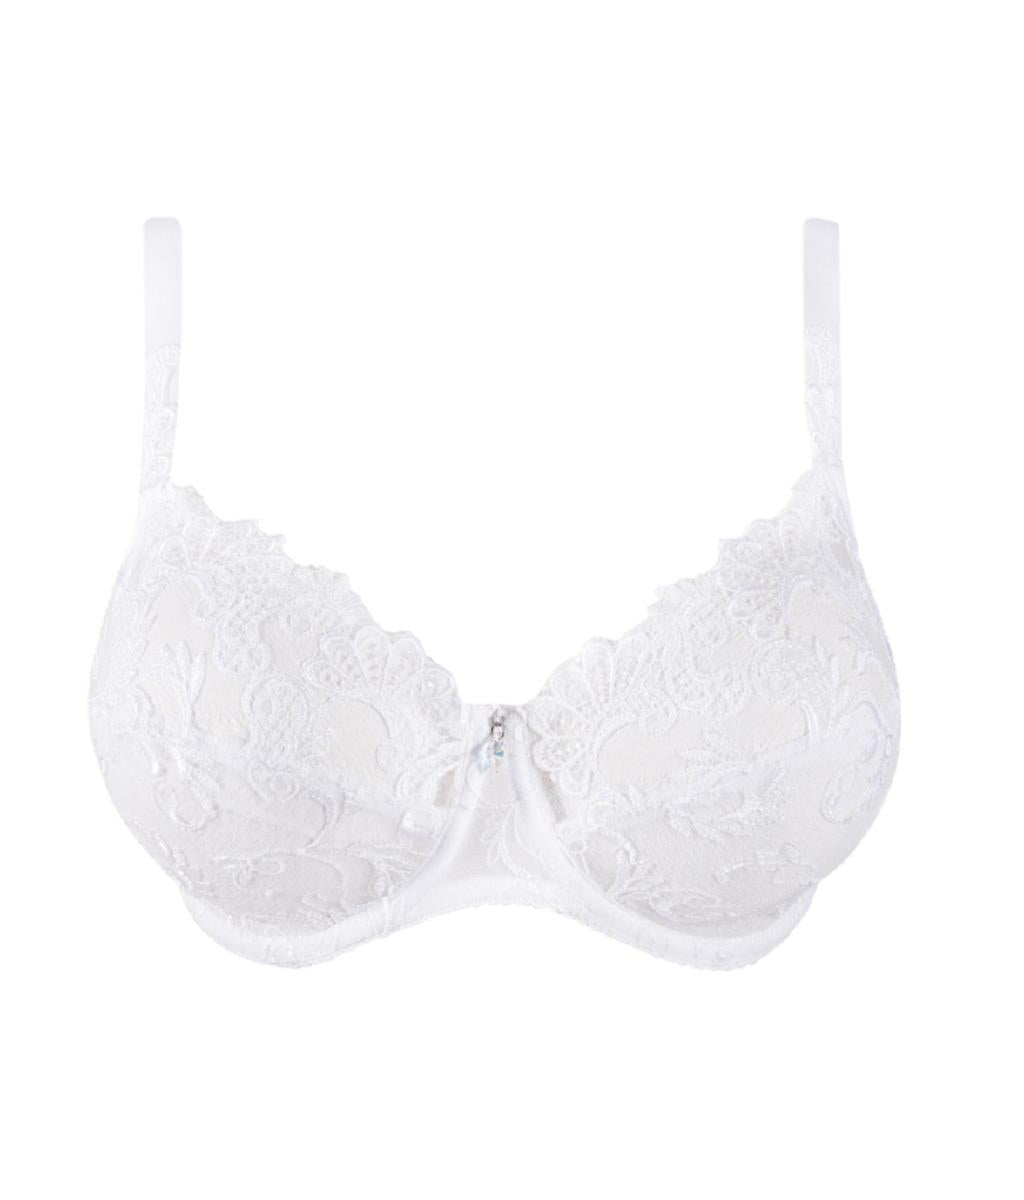 Eprise 'Guipure Charming' (White) 3 Part Full Cup Bra - Sandra Dee - Product Shot - Front